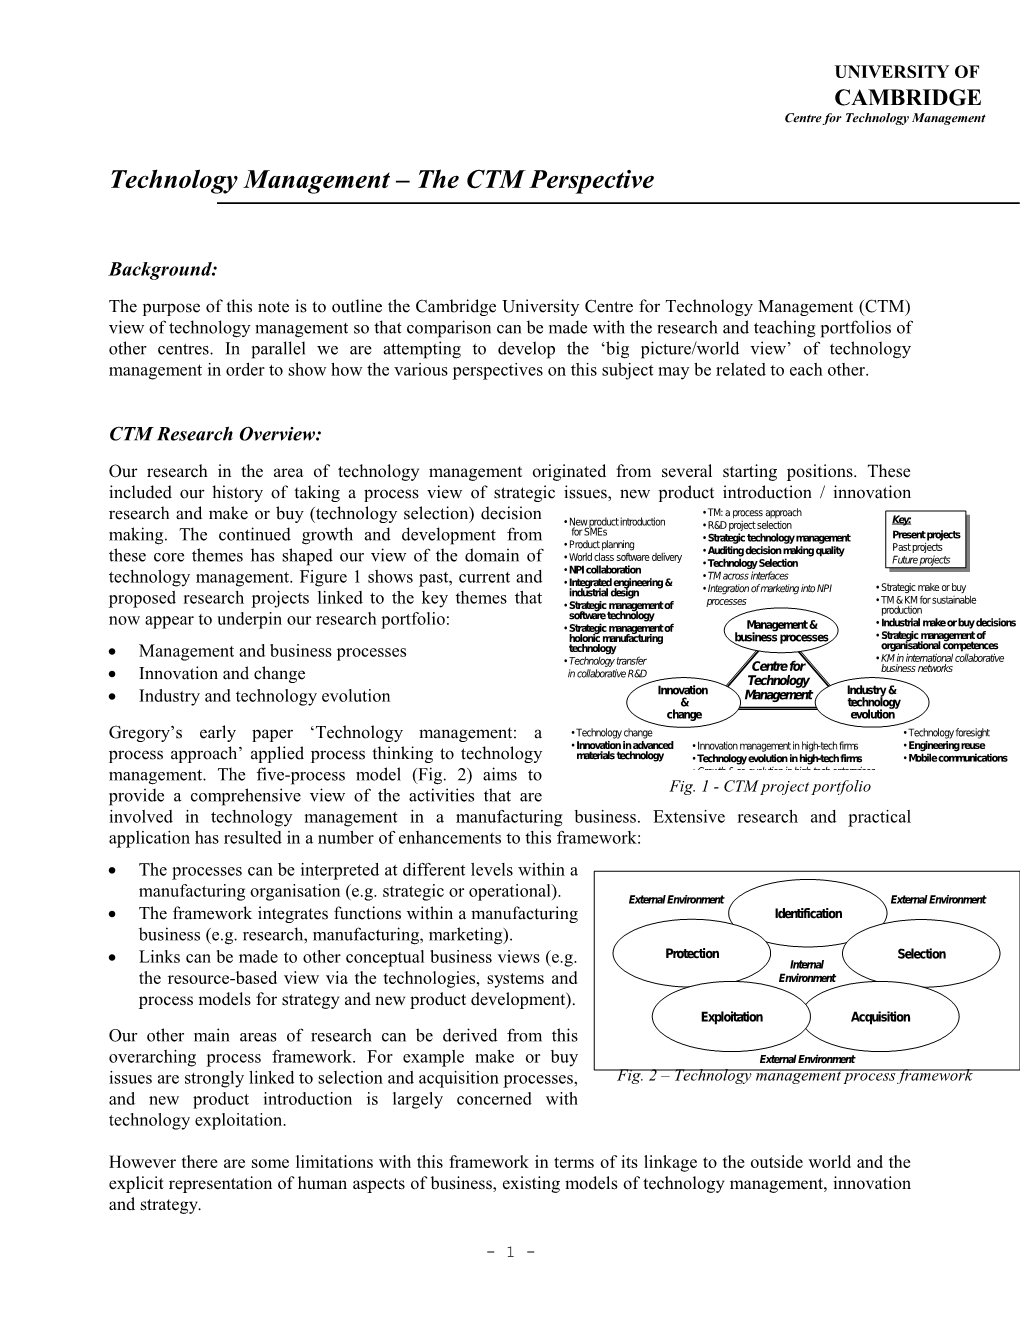 Technology Management the CTM Perspective